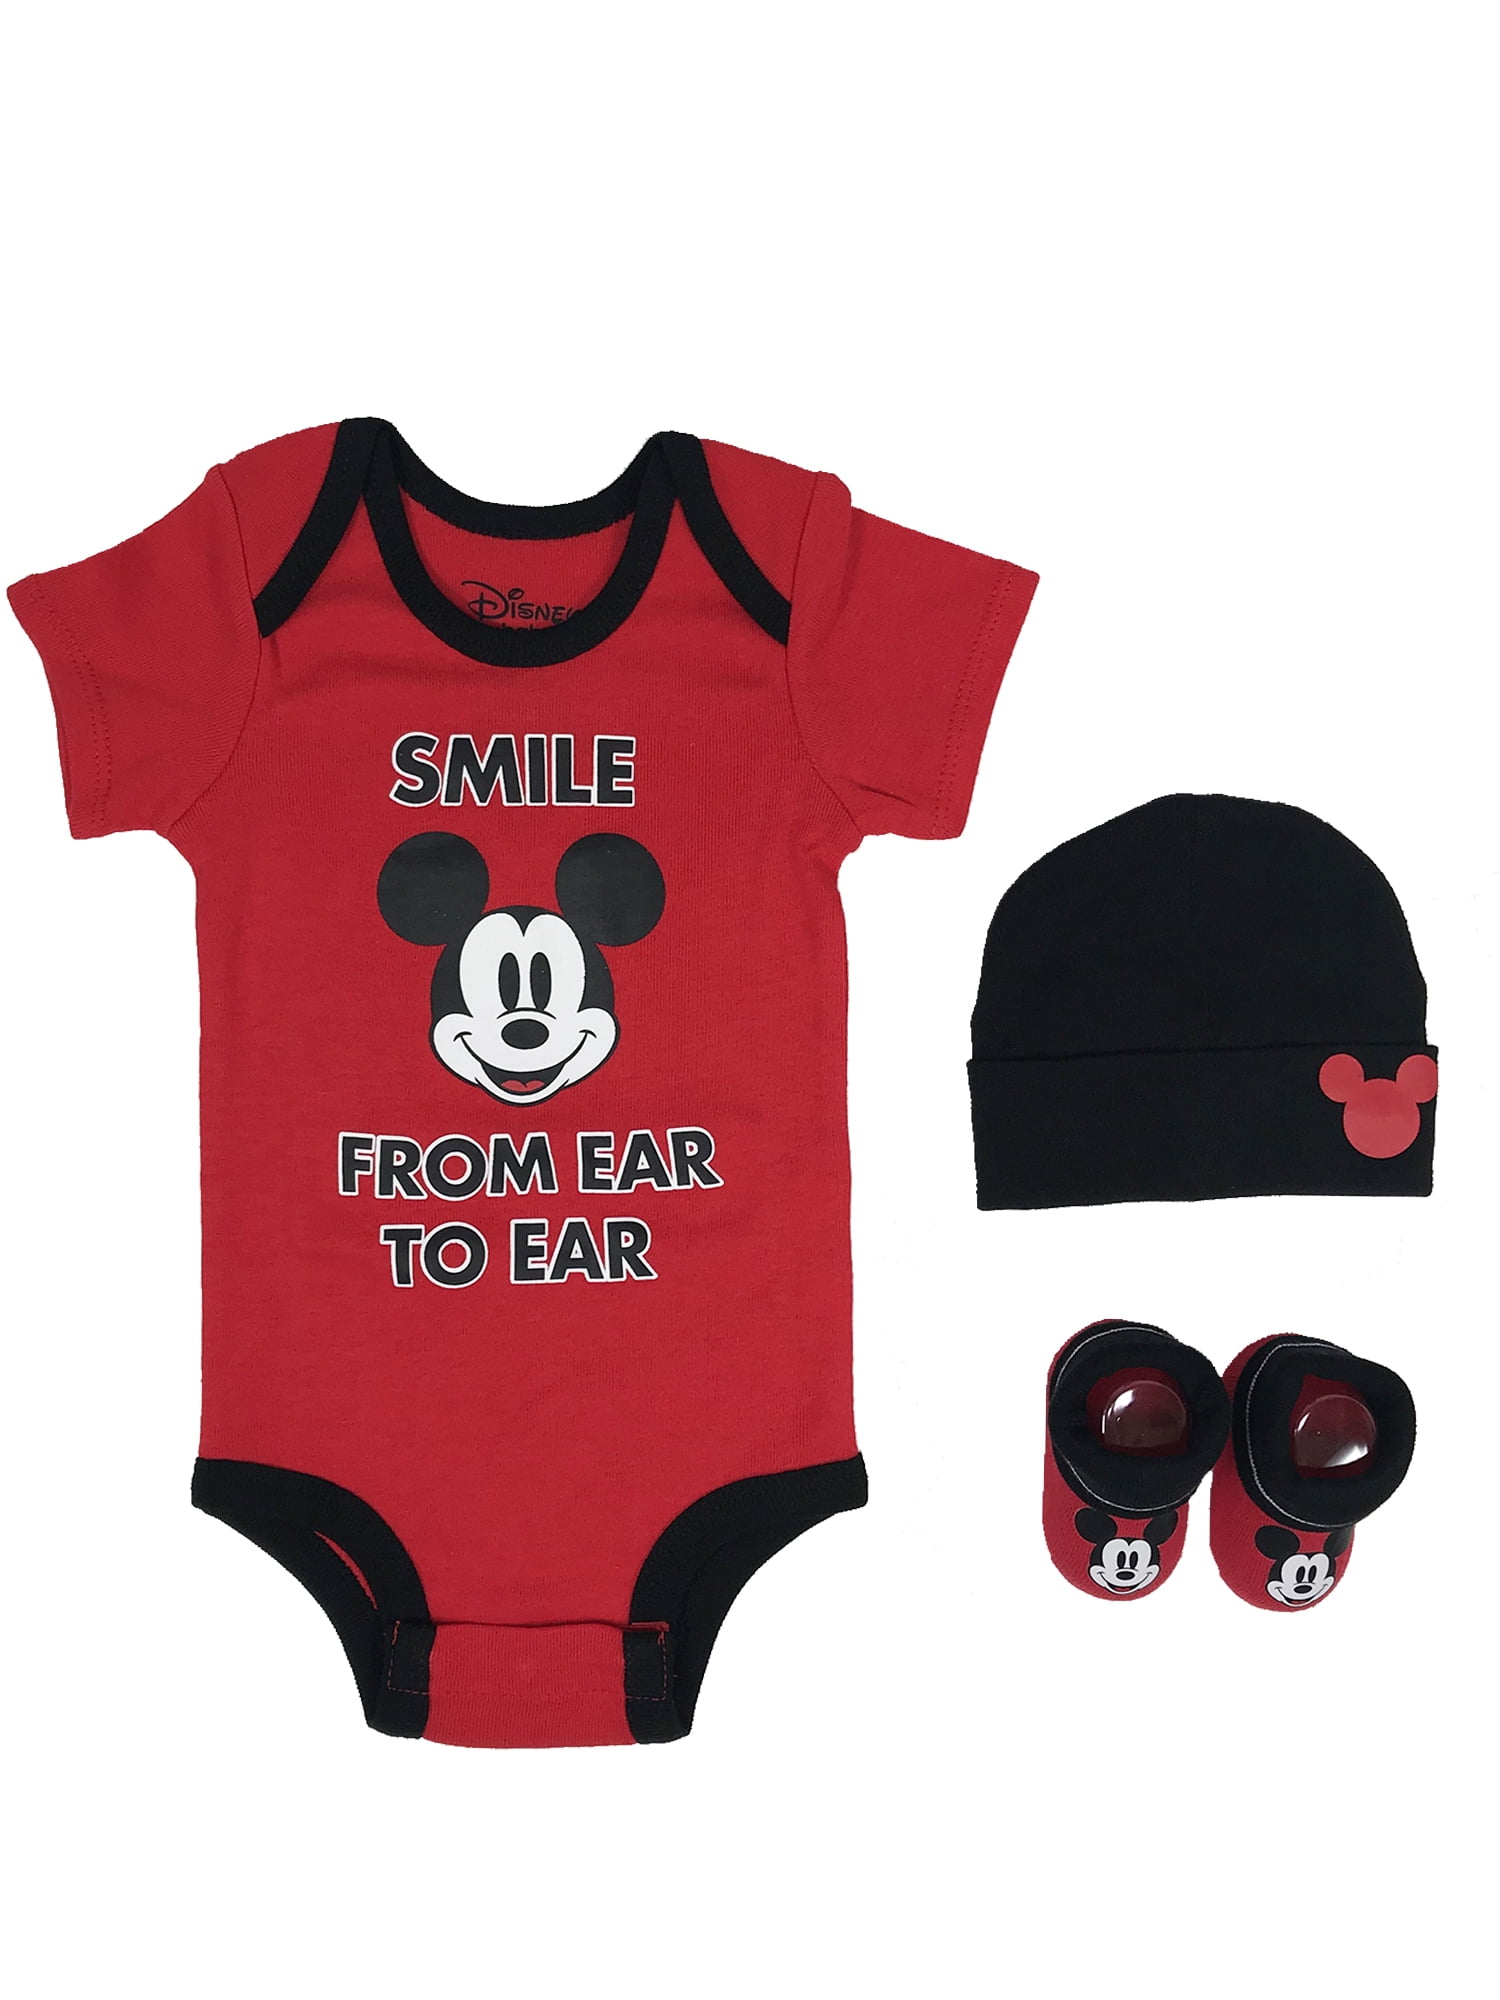 BRAND NEW BABY DISNEY MICKEY MOUSE 3 PIECE GIFT SET SIZE 0-3 TO 3-6 MONTHS 